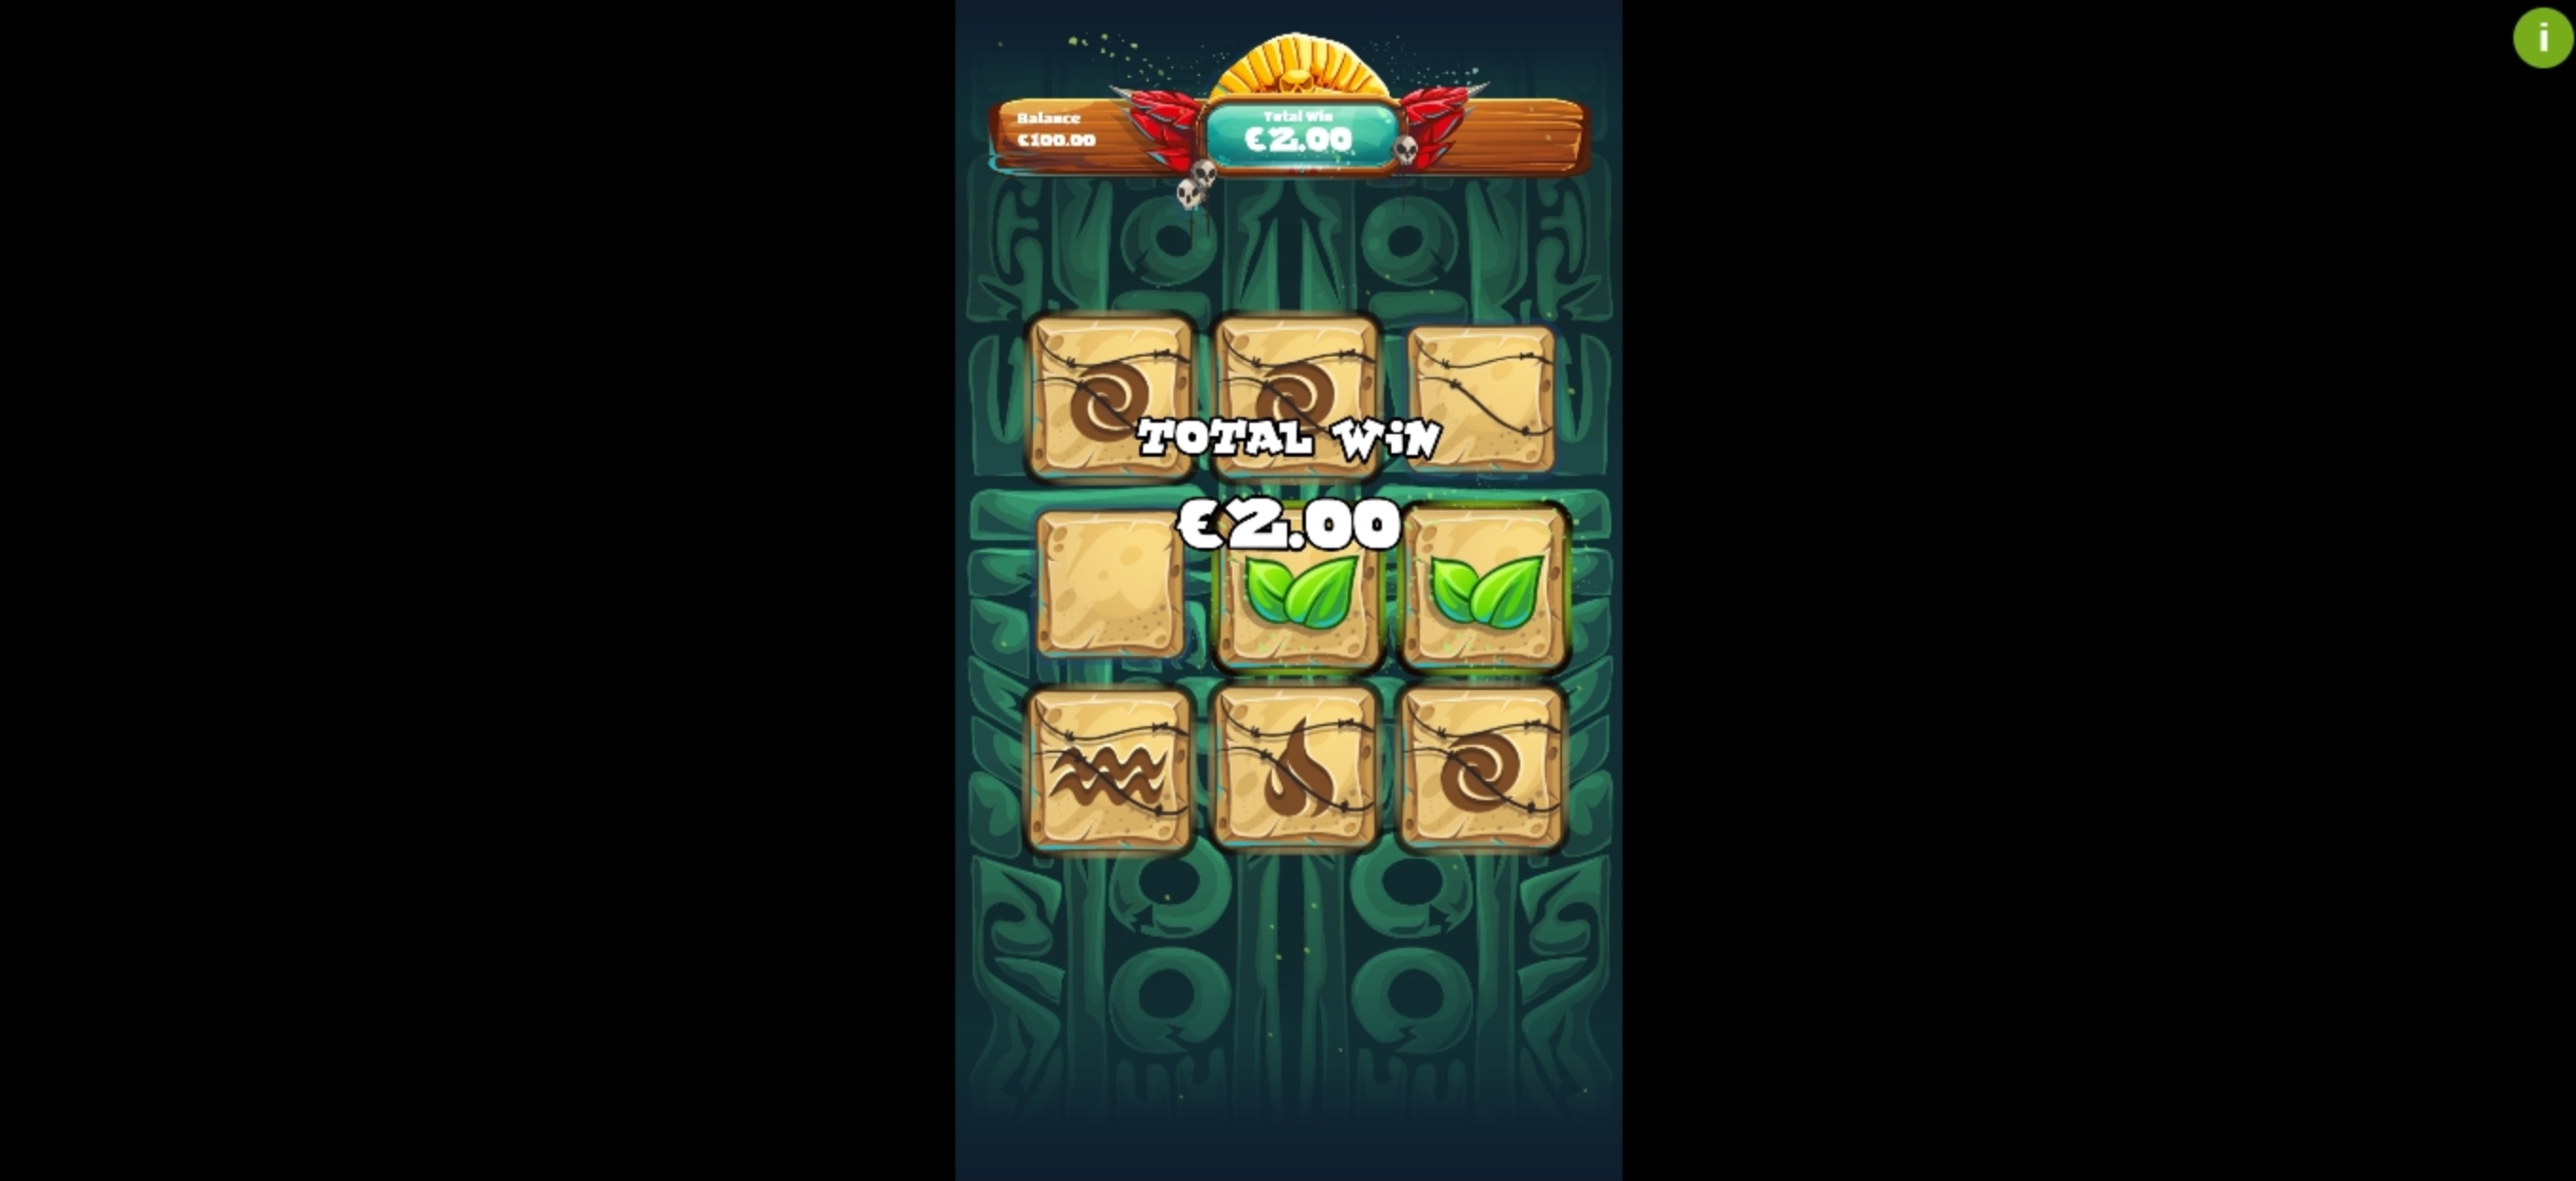 Win Money in Shaman's Jungle Free Slot Game by Cubeia